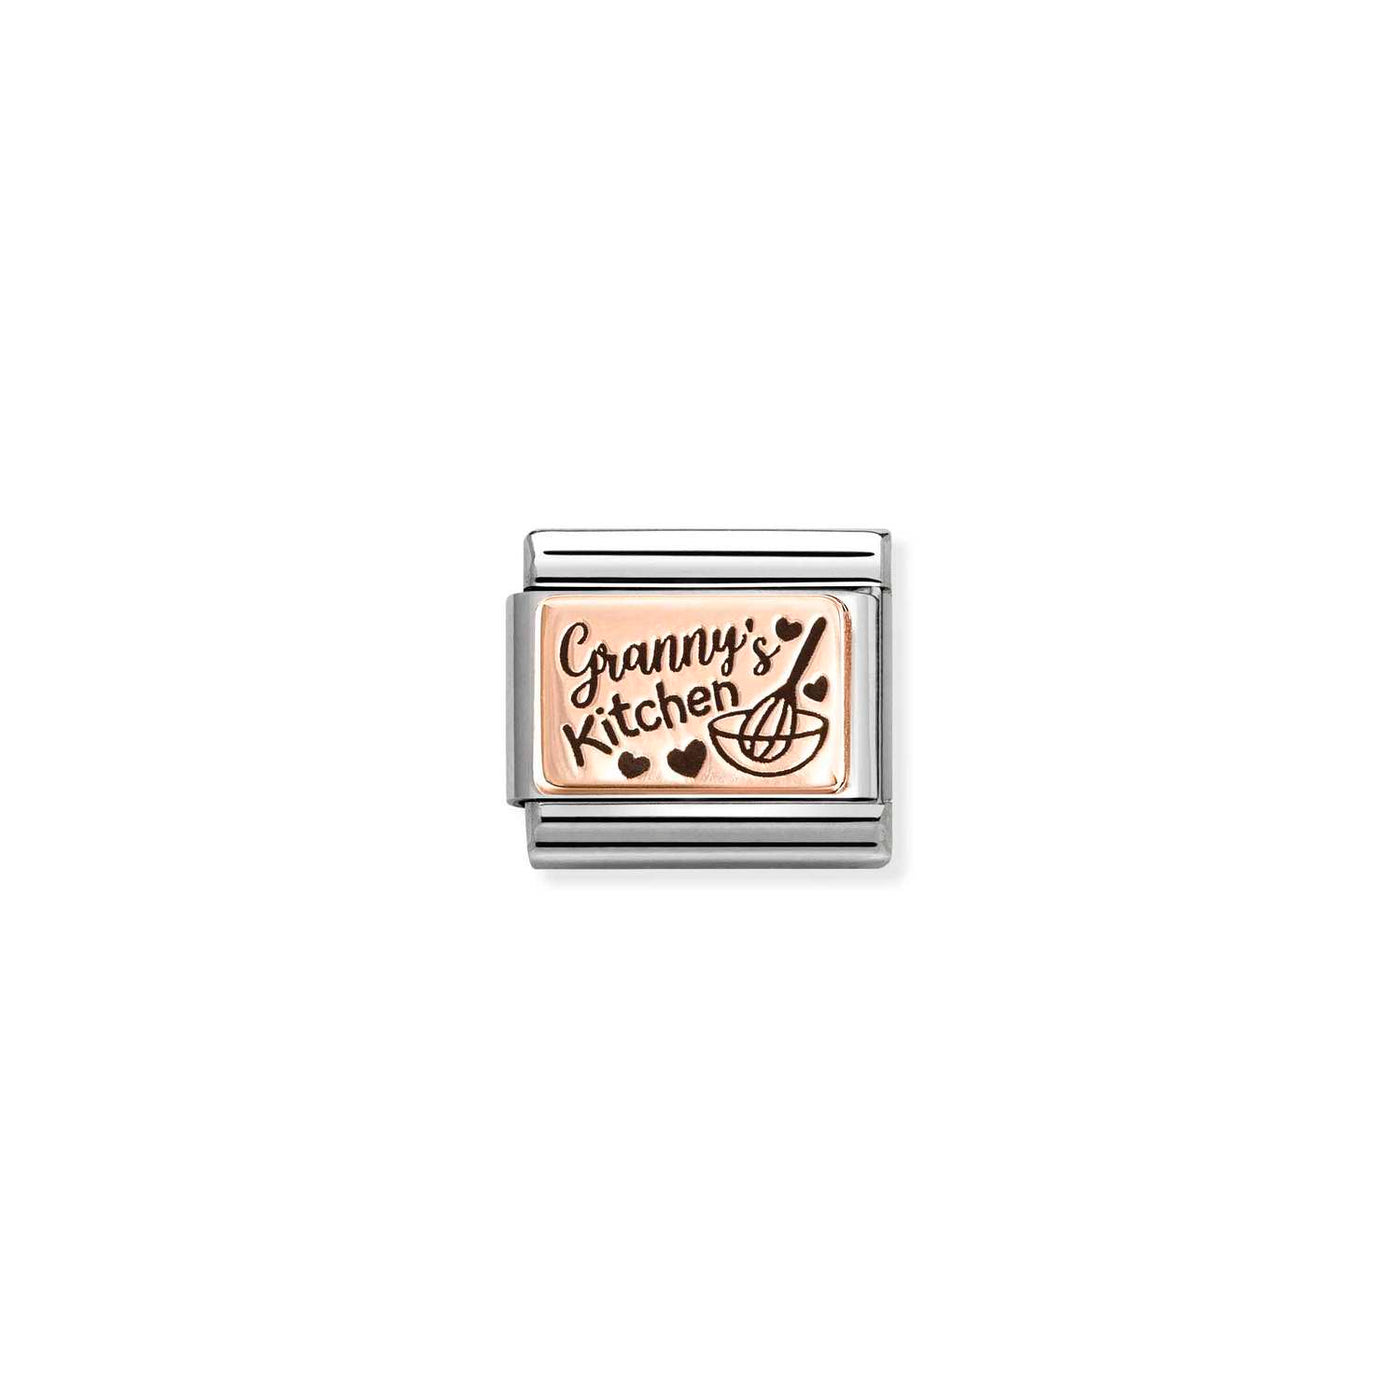 Nomination Classic 9ct Rose Gold Granny's Kitchen Charm